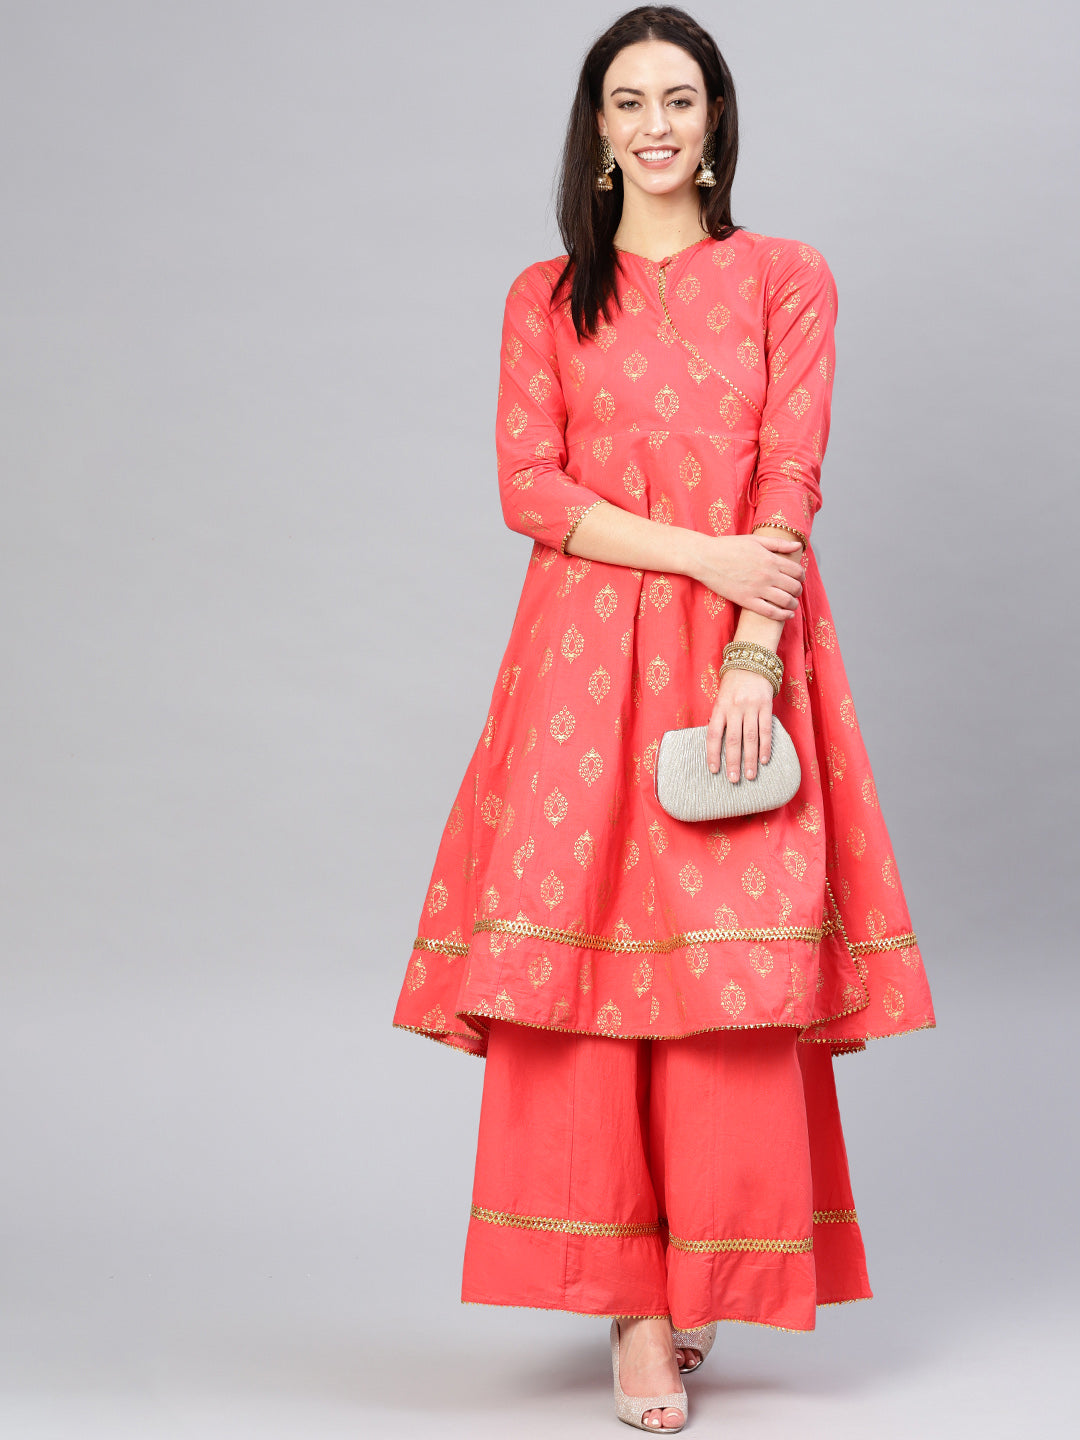 Women's Peach And Golden Printed Kurta With Palazzos - Bhama Couture